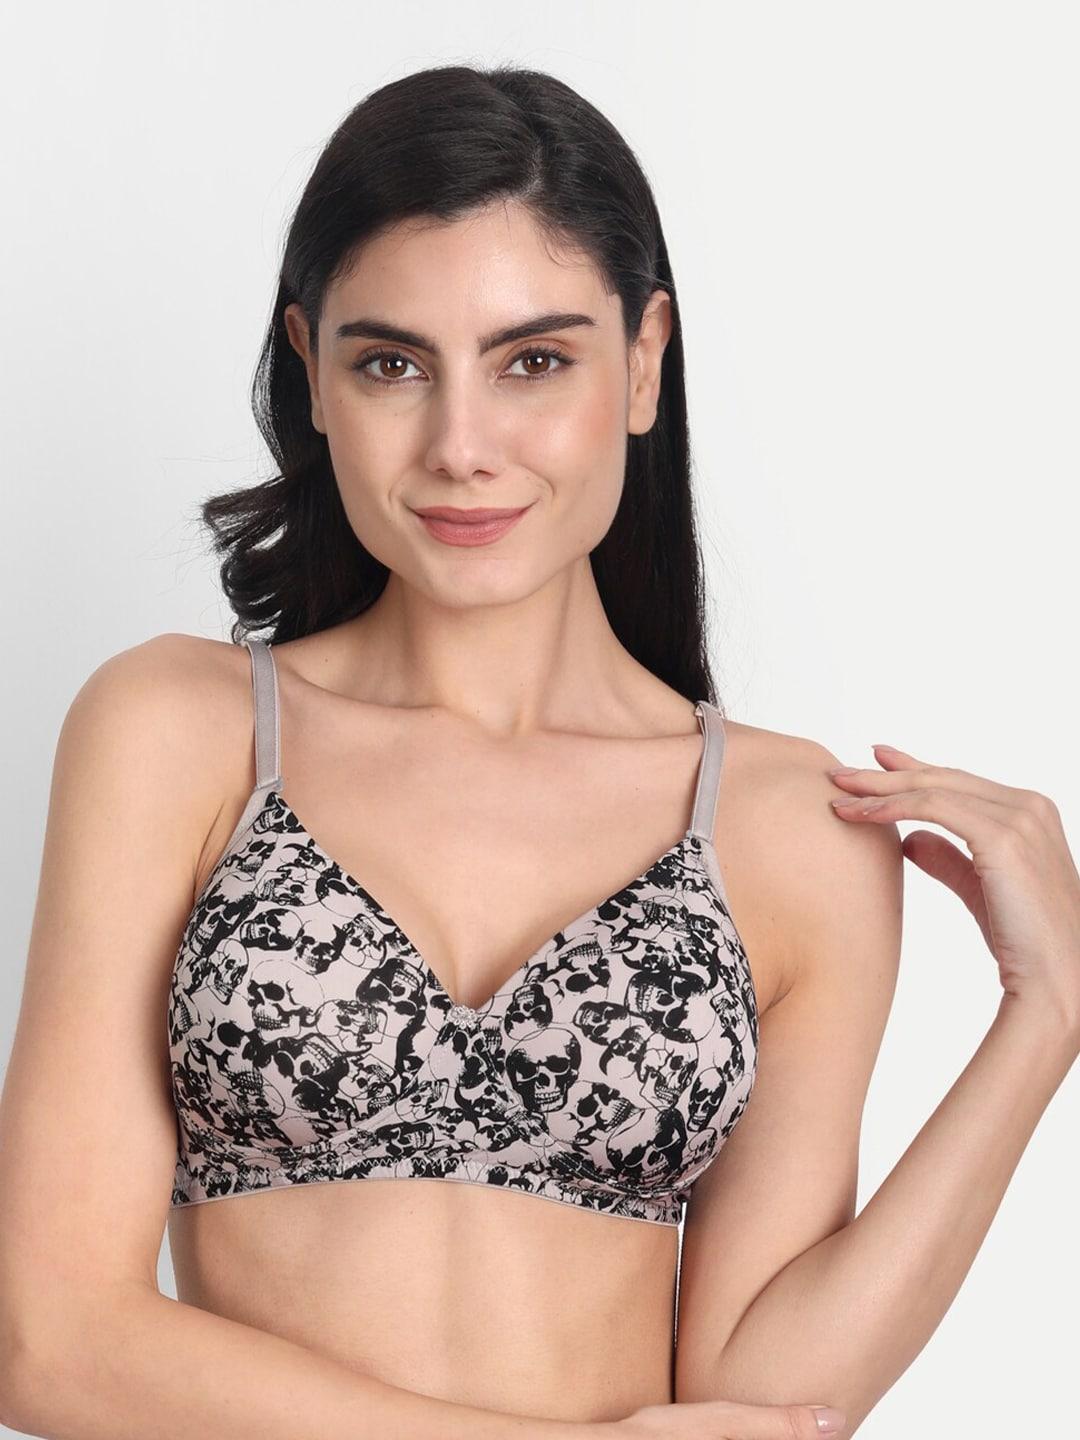 Aimly Abstract Printed Full Coverage Seamless Heavily Padded Non-Wired Dry-Fit Push-Up Bra